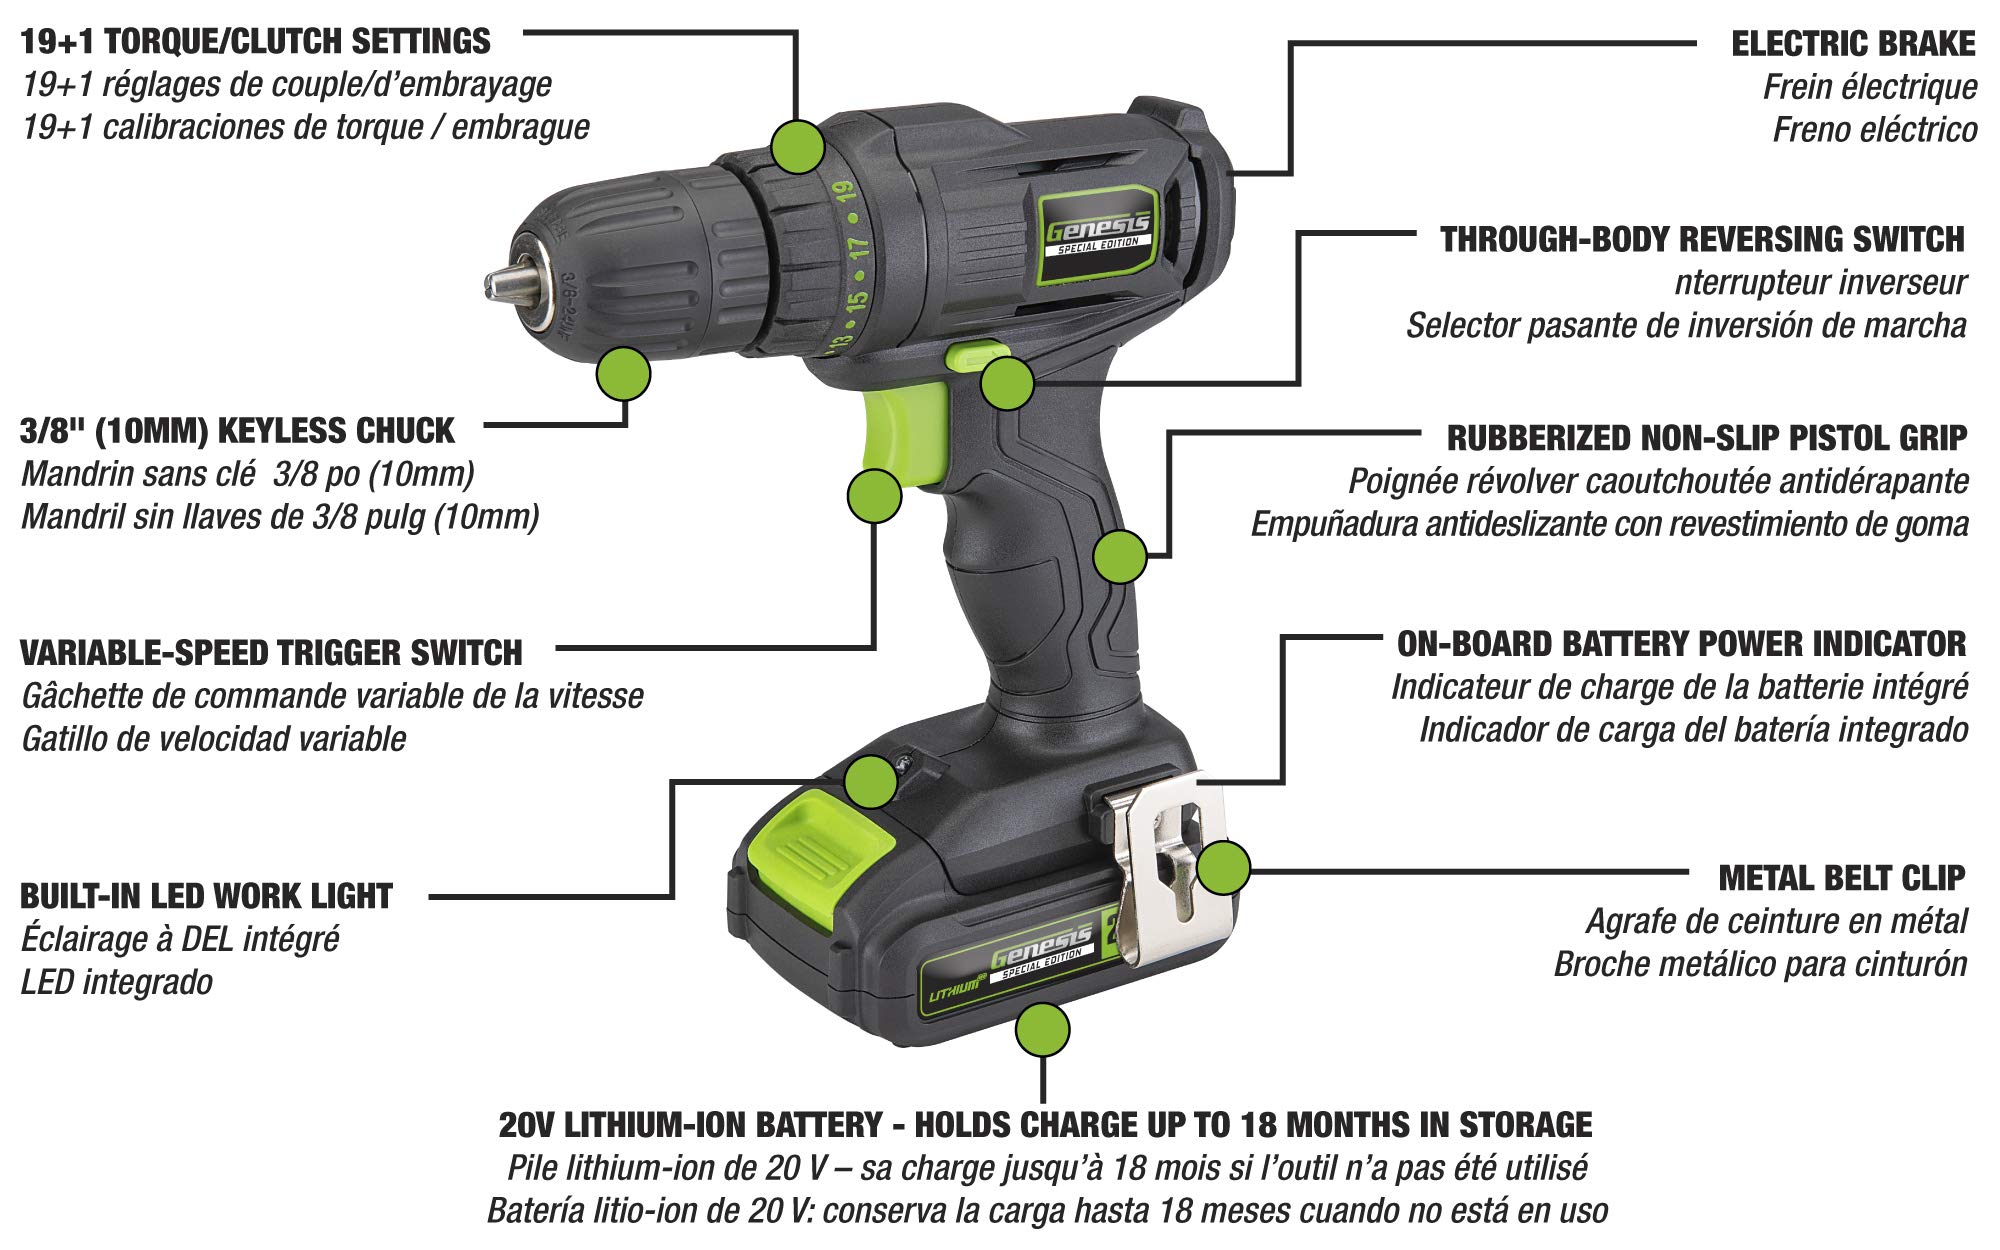 Genesis GLCD20CSE Special Edition 20V Lithium-Ion Cordless Drill/Driver with Built-in LED Light, 19+1 Torque Position Settings, Removable/Rechargeable Battery and Charger Included